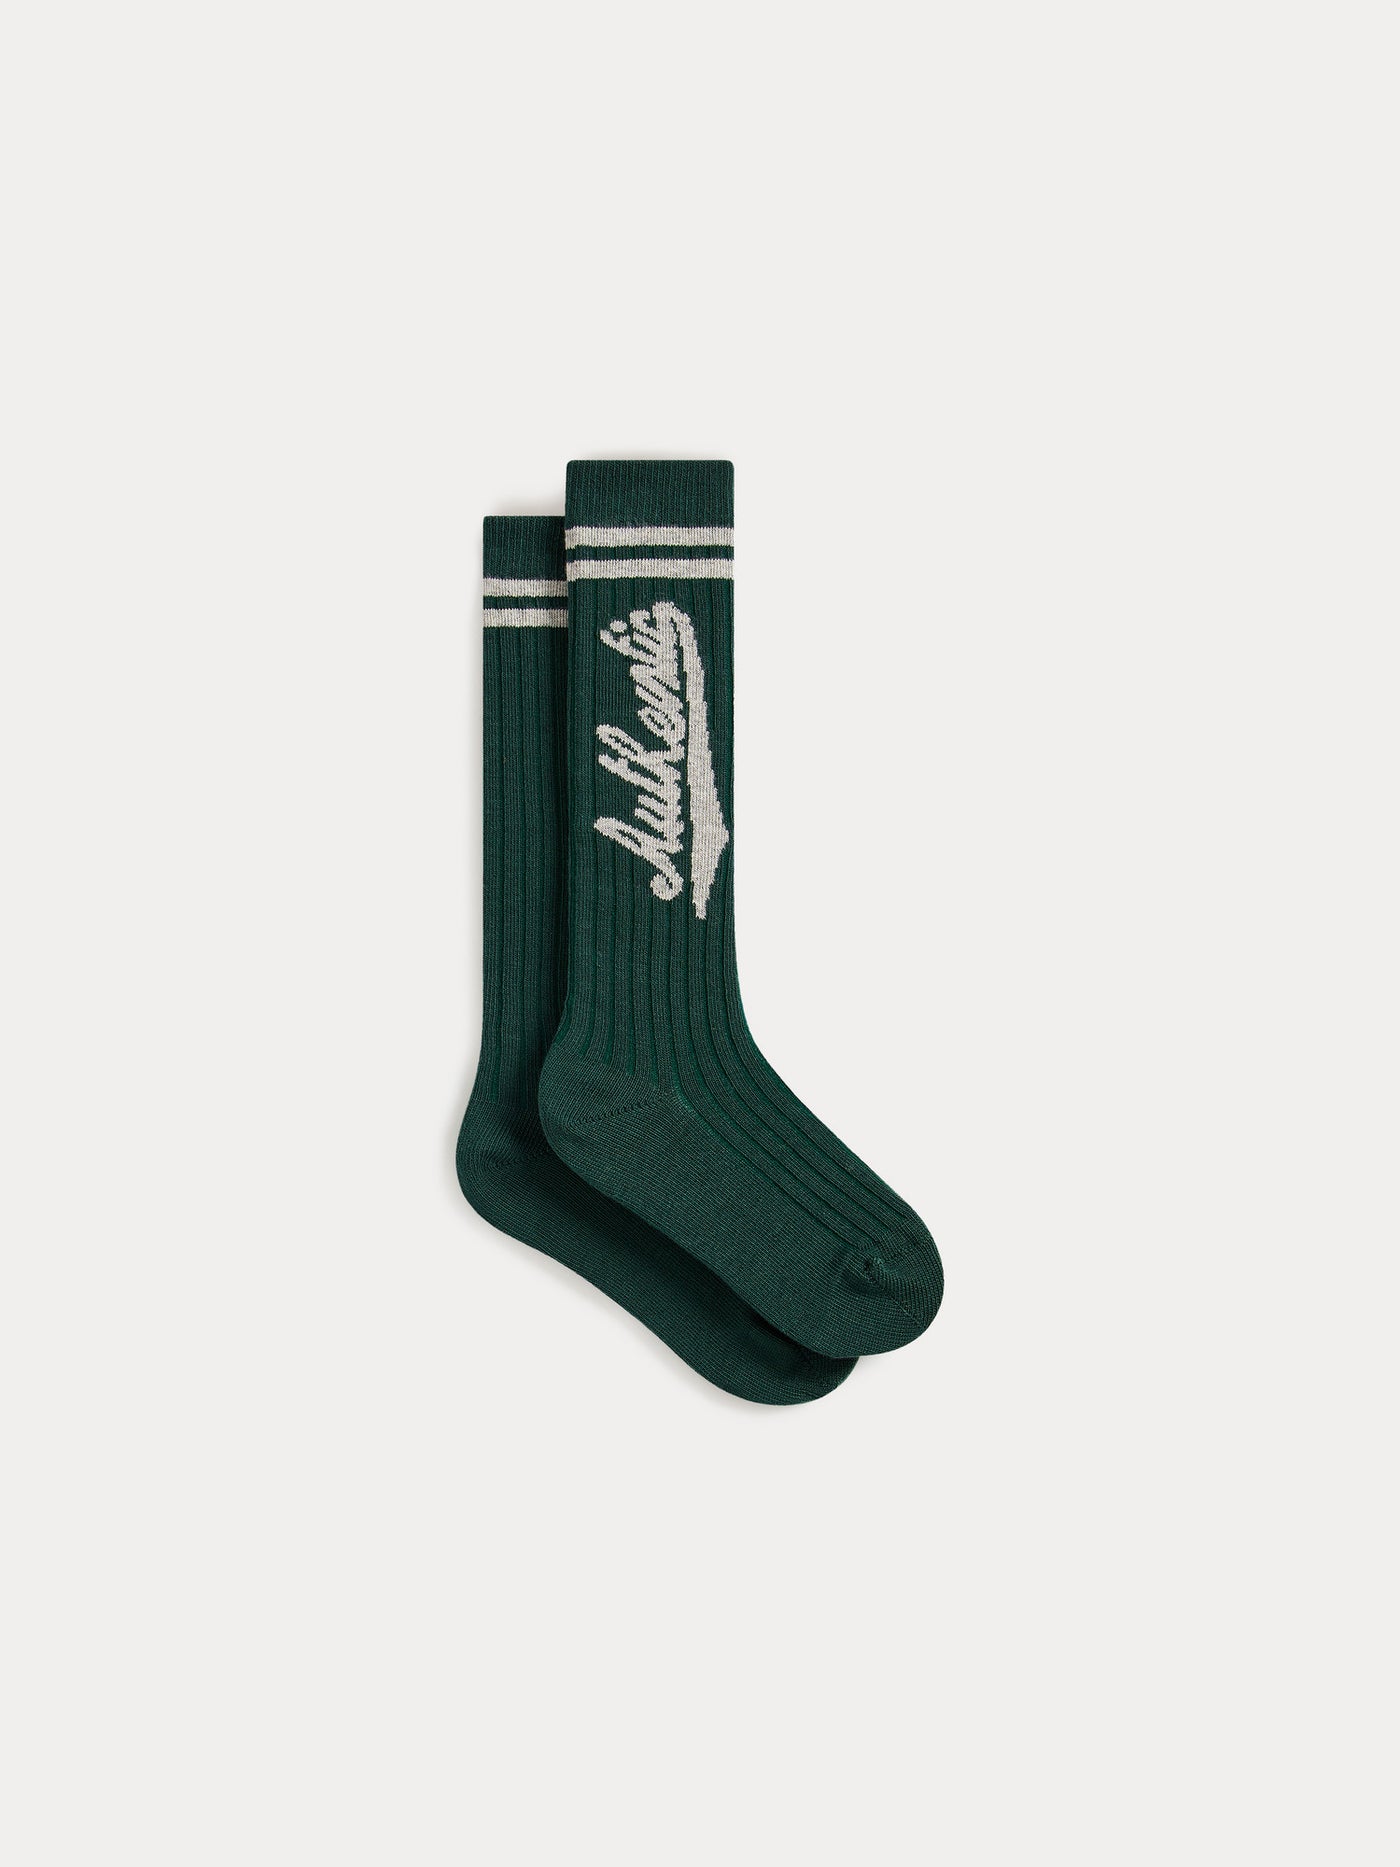 Chaussettes Doby vert